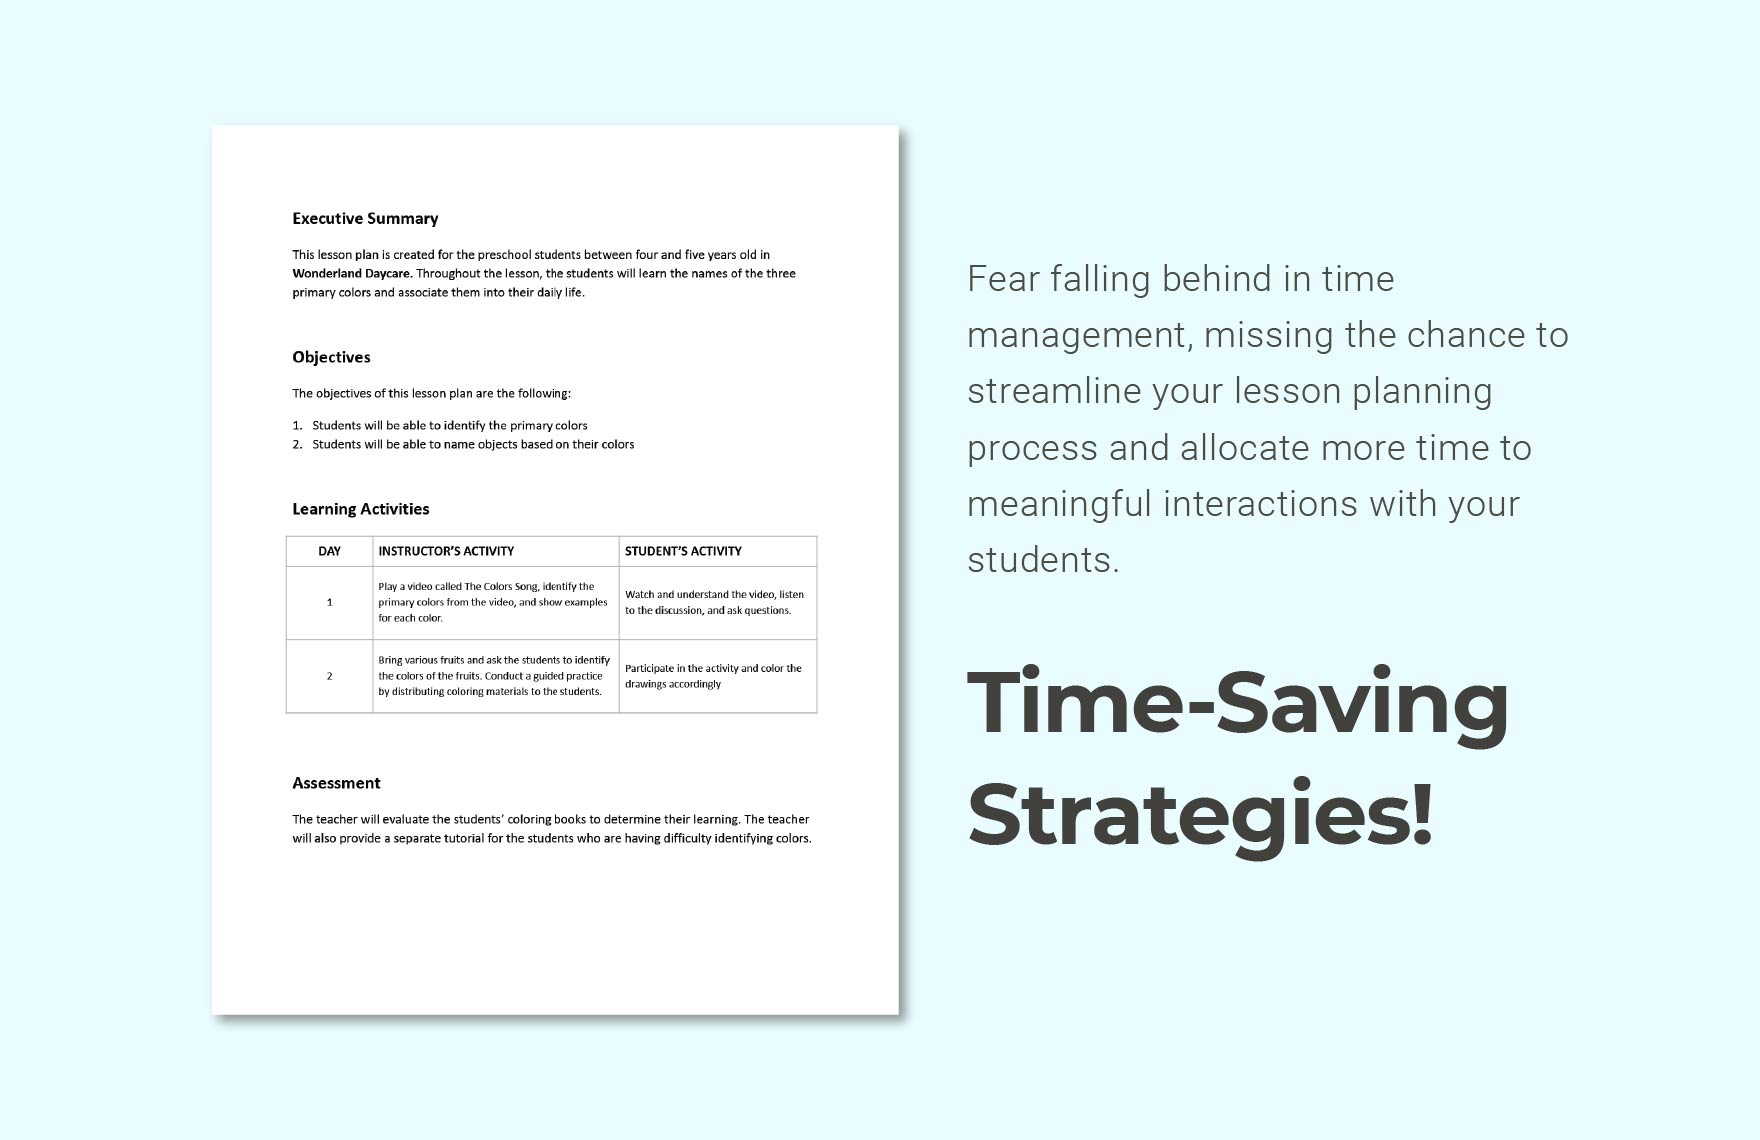 Sample Daycare Lesson Plan Template